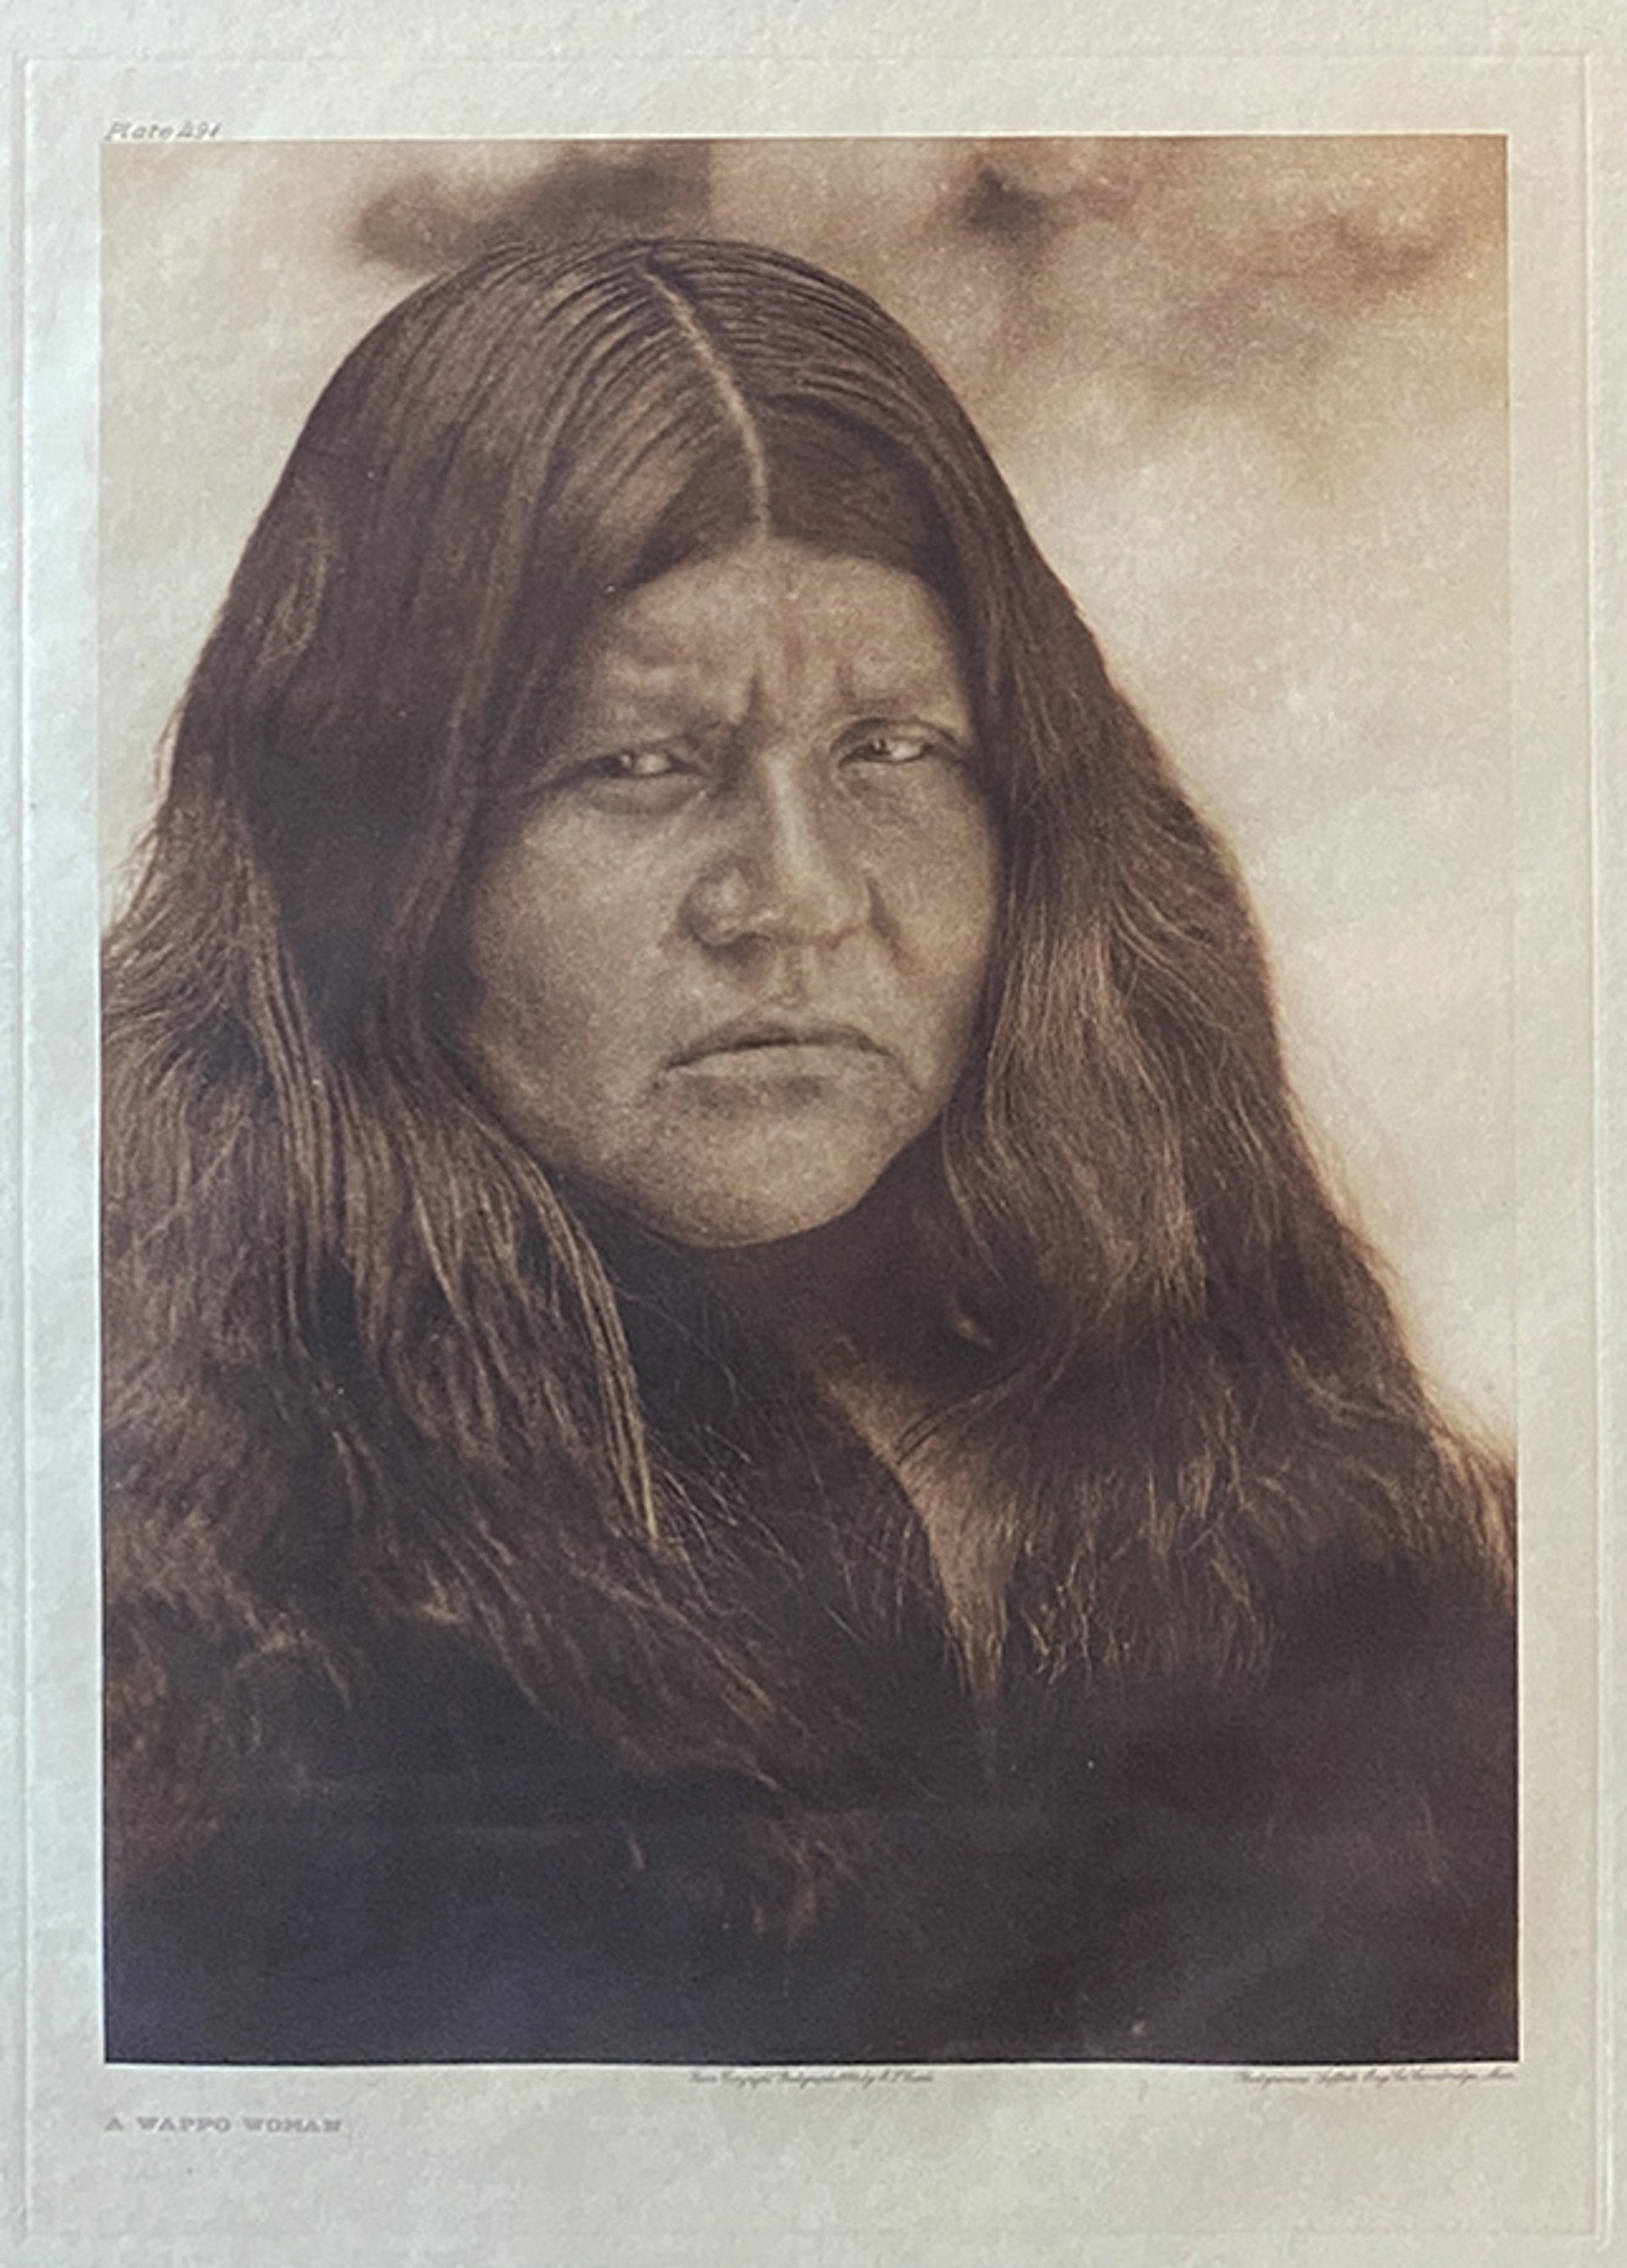 A Wappo Woman, plate #491 by Edward S Curtis